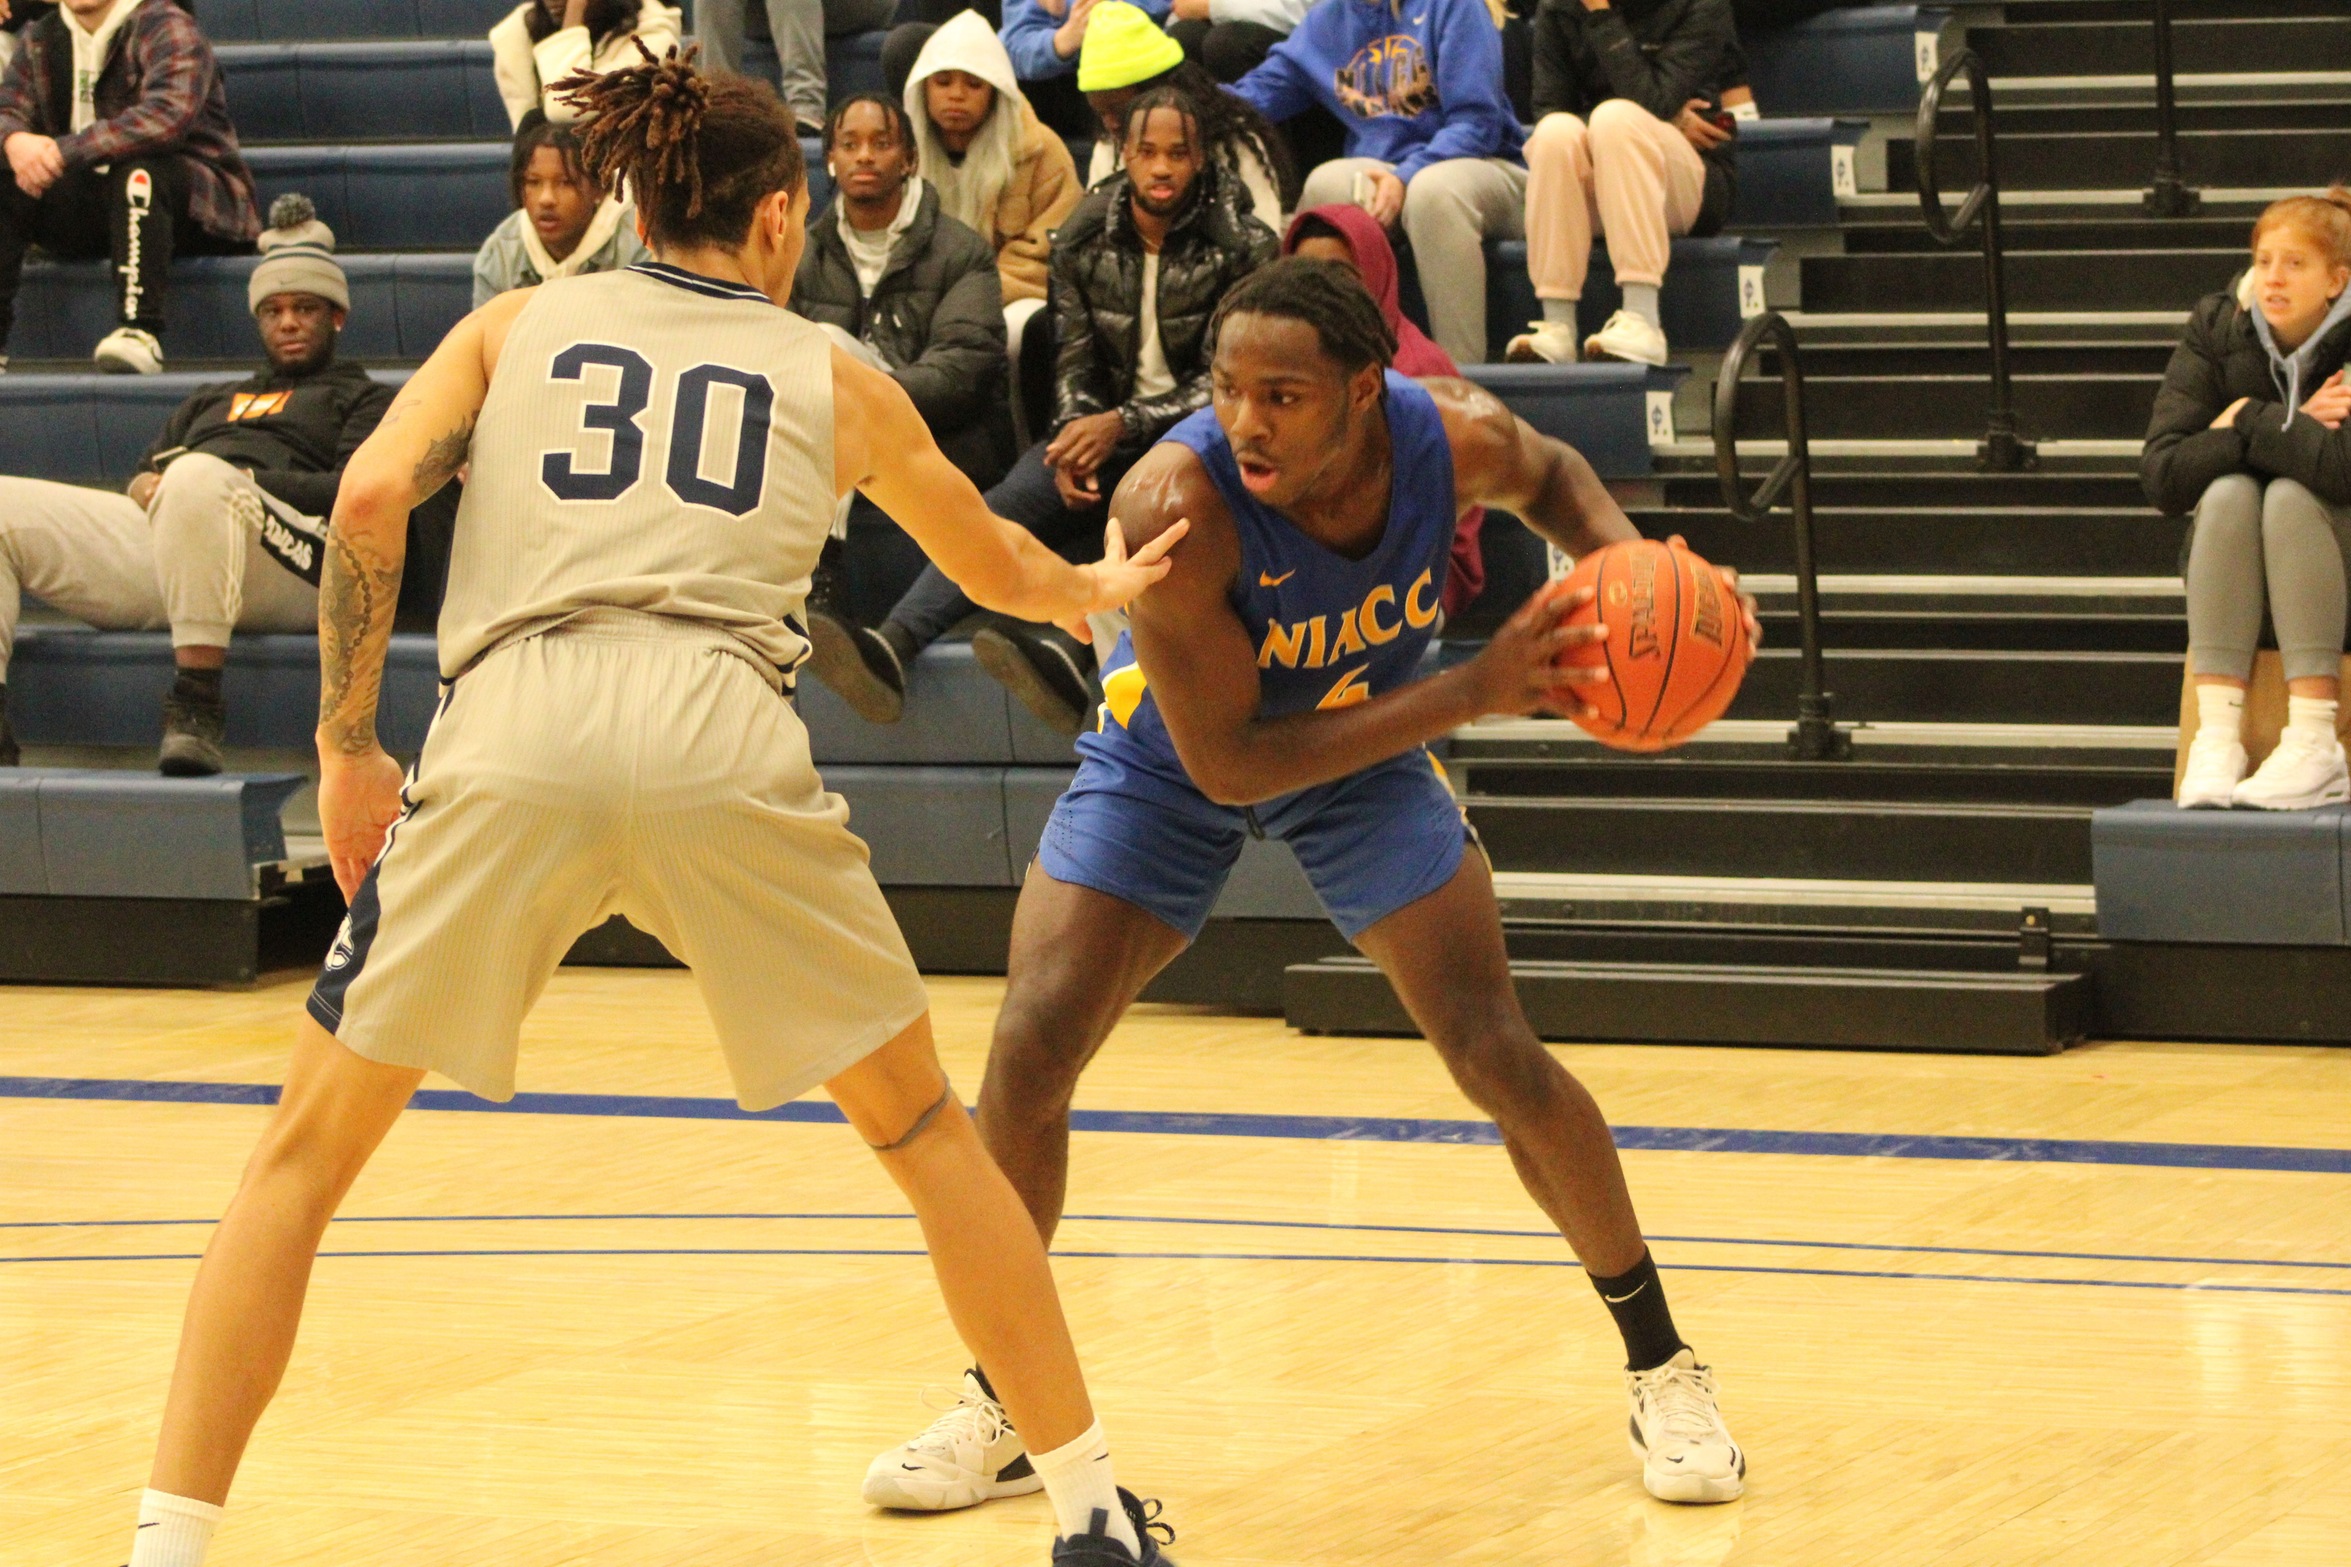 NIACC's Jacques Kelly looks to drive to the basket in a game earlier this season at Iowa Central.